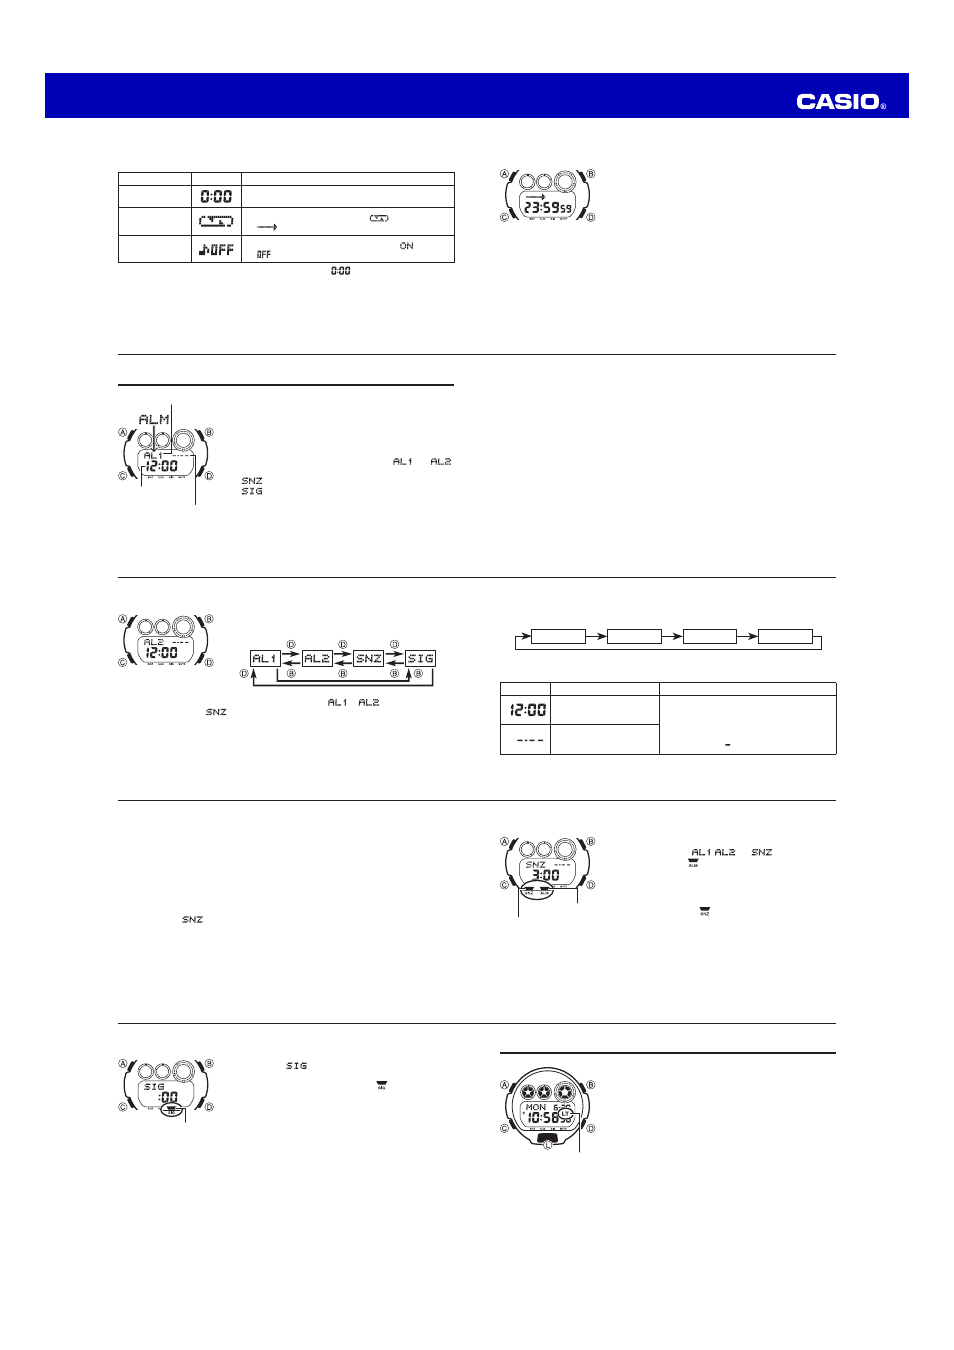 Operation guide 3420 | G-Shock GD-X6930E-9 User Manual | Page 3 / 5